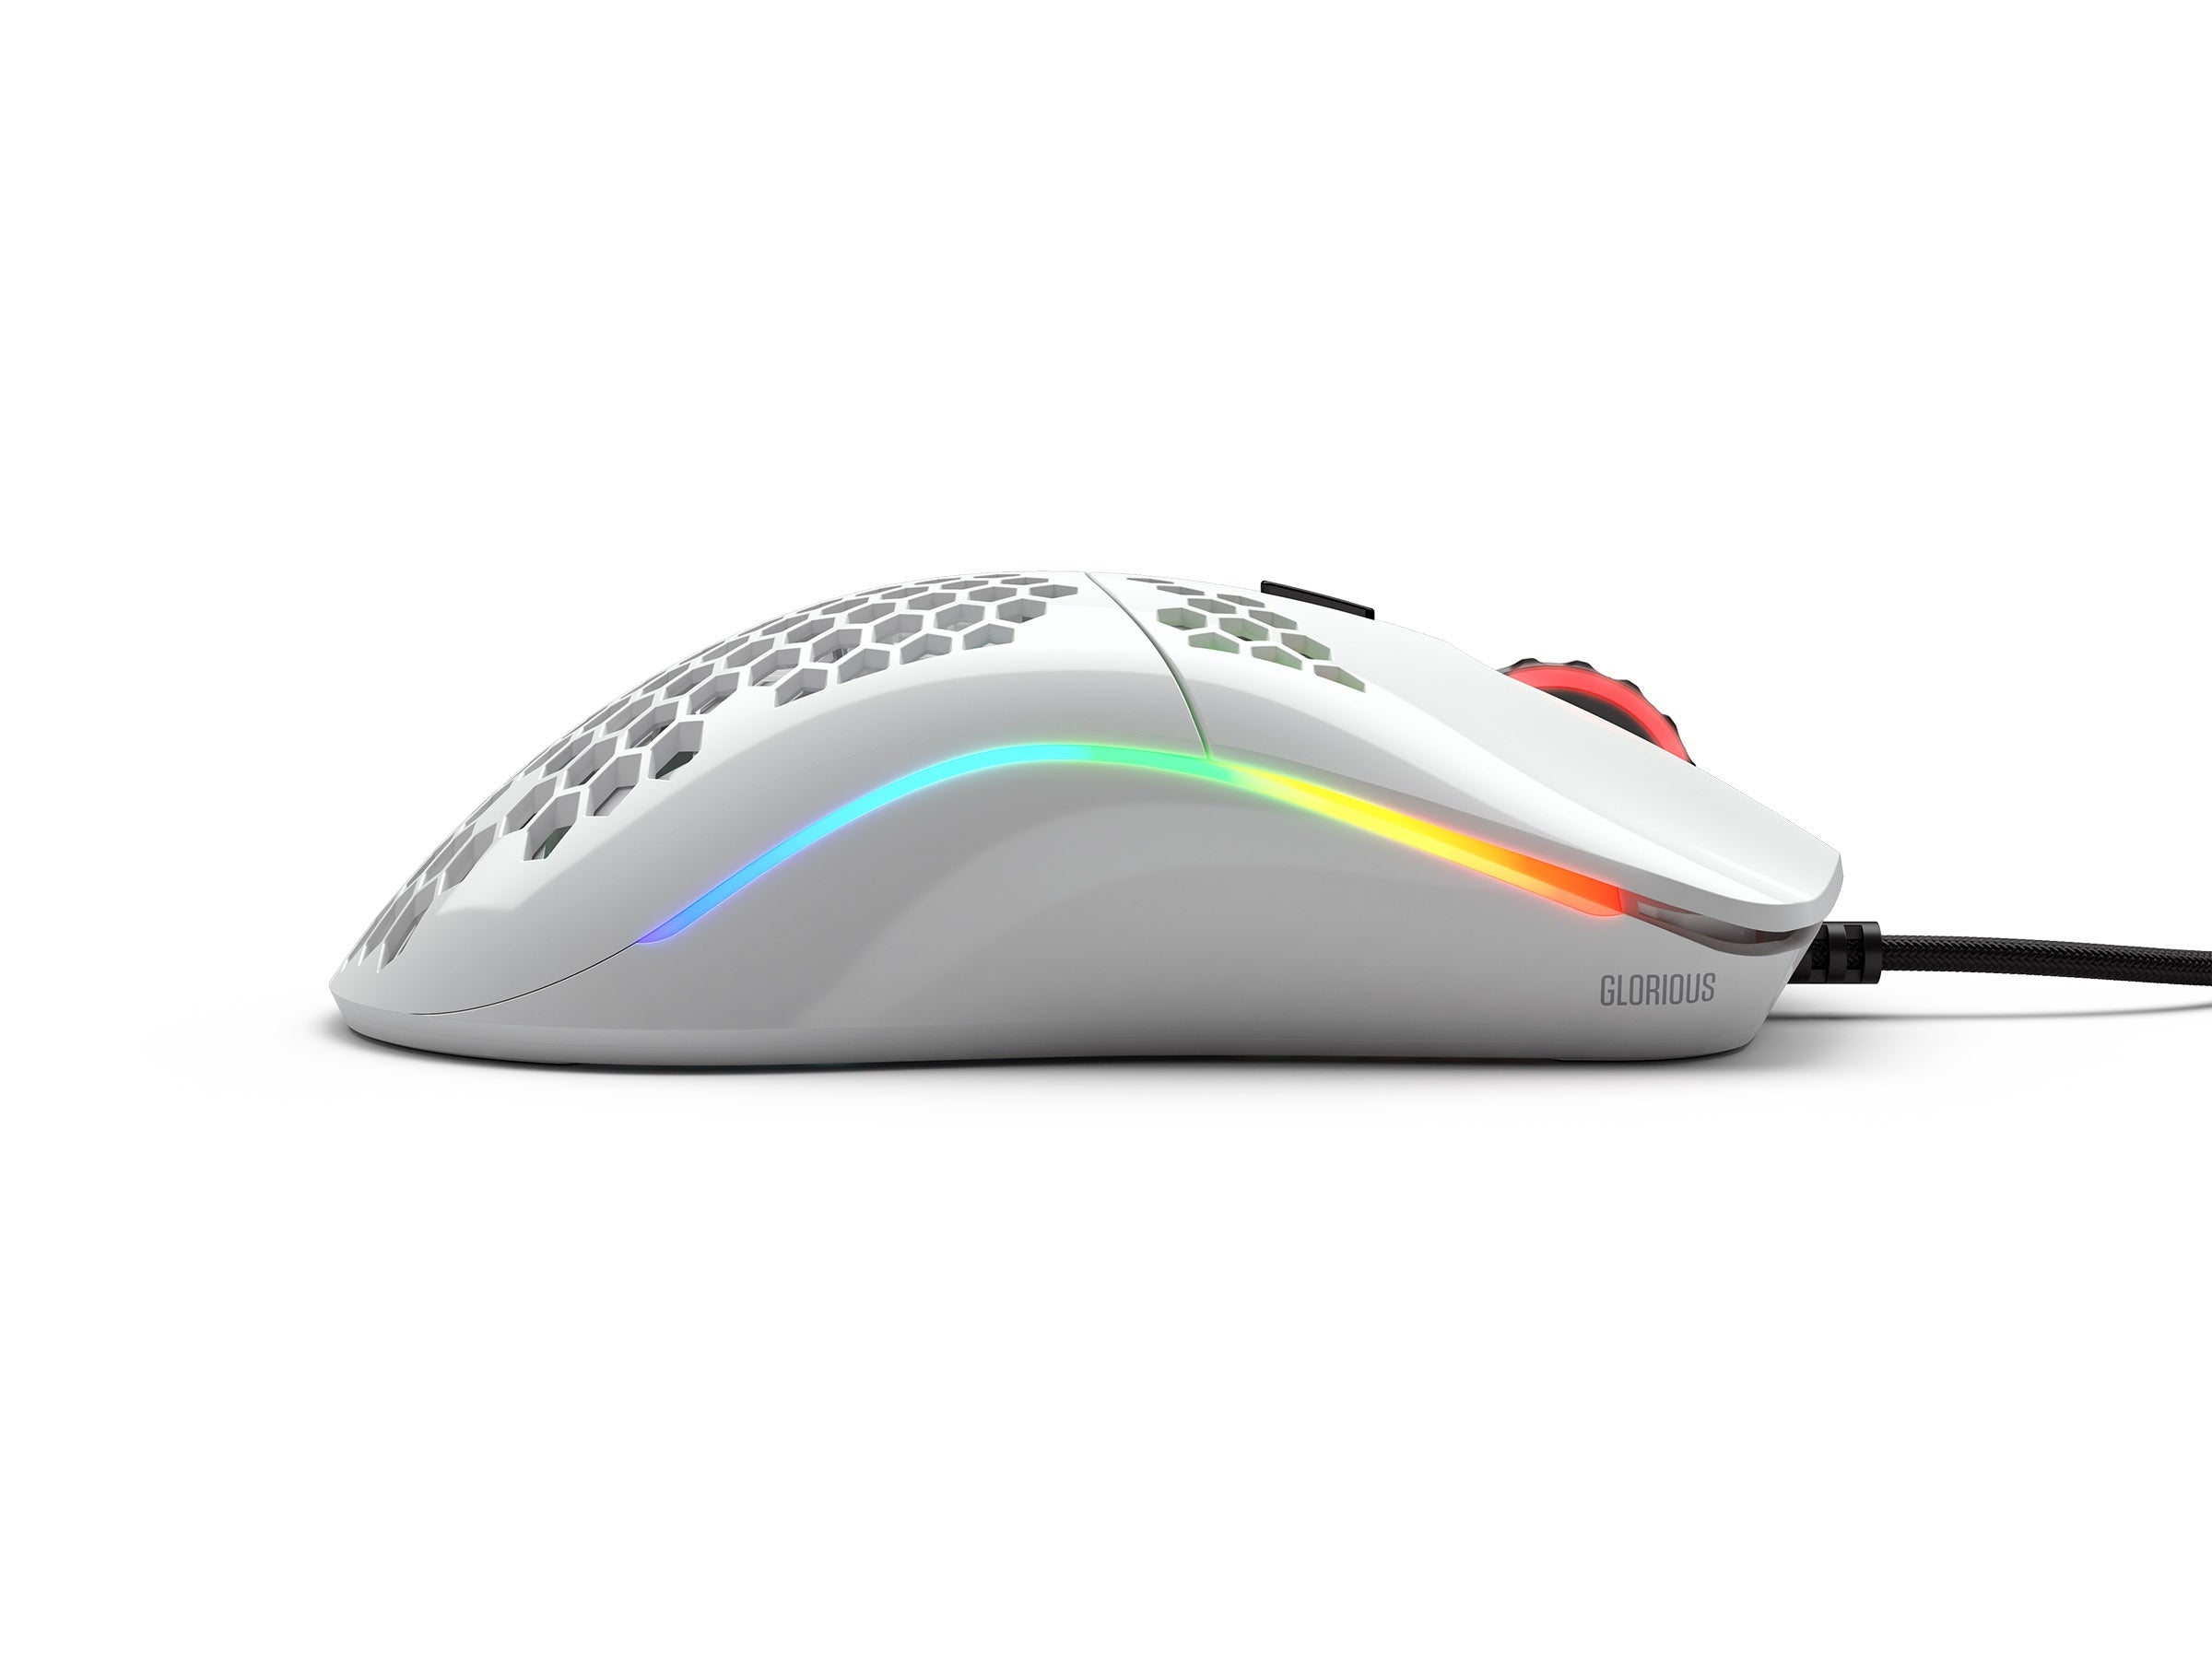 Glorious PC Model O Minus Glossy White Lightweight Gaming Mouse MKJRSNI0T6 |27501|